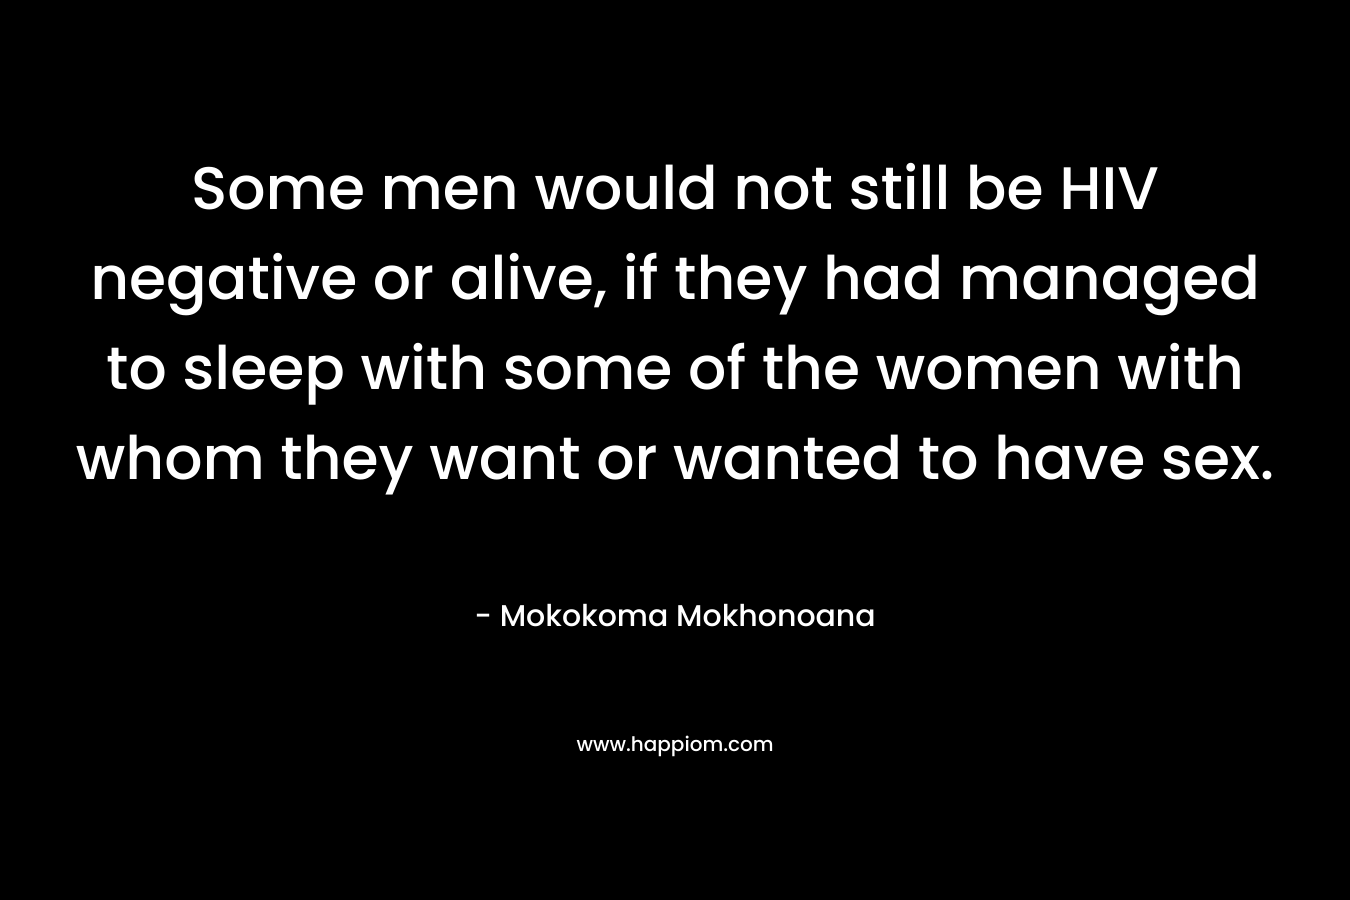 Some men would not still be HIV negative or alive, if they had managed to sleep with some of the women with whom they want or wanted to have sex. – Mokokoma Mokhonoana